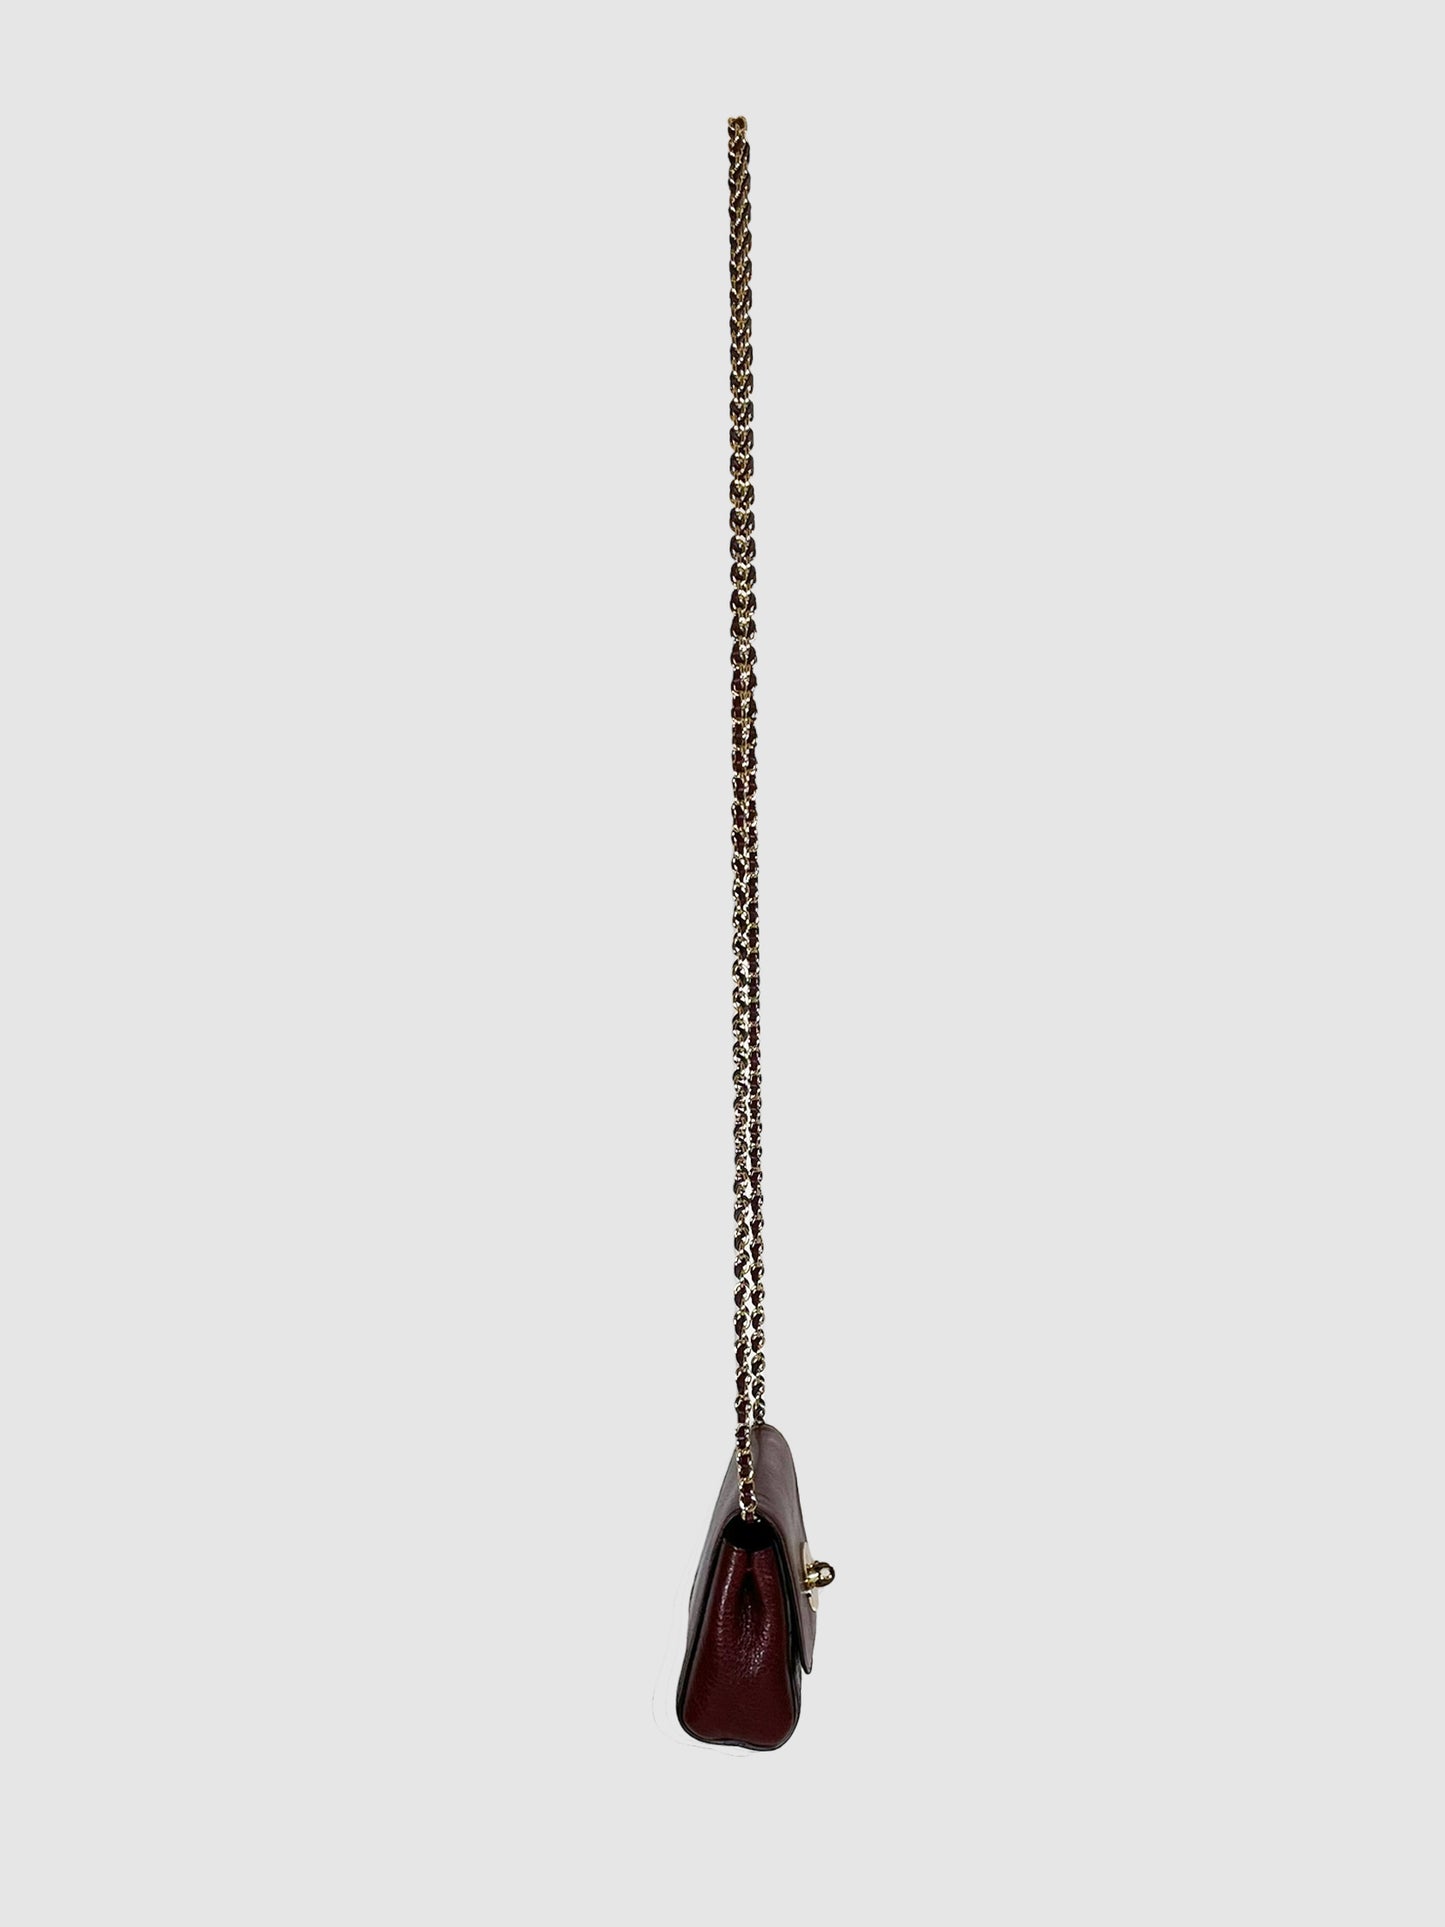 Mulberry Mini Lily Chain Shoulder Bag